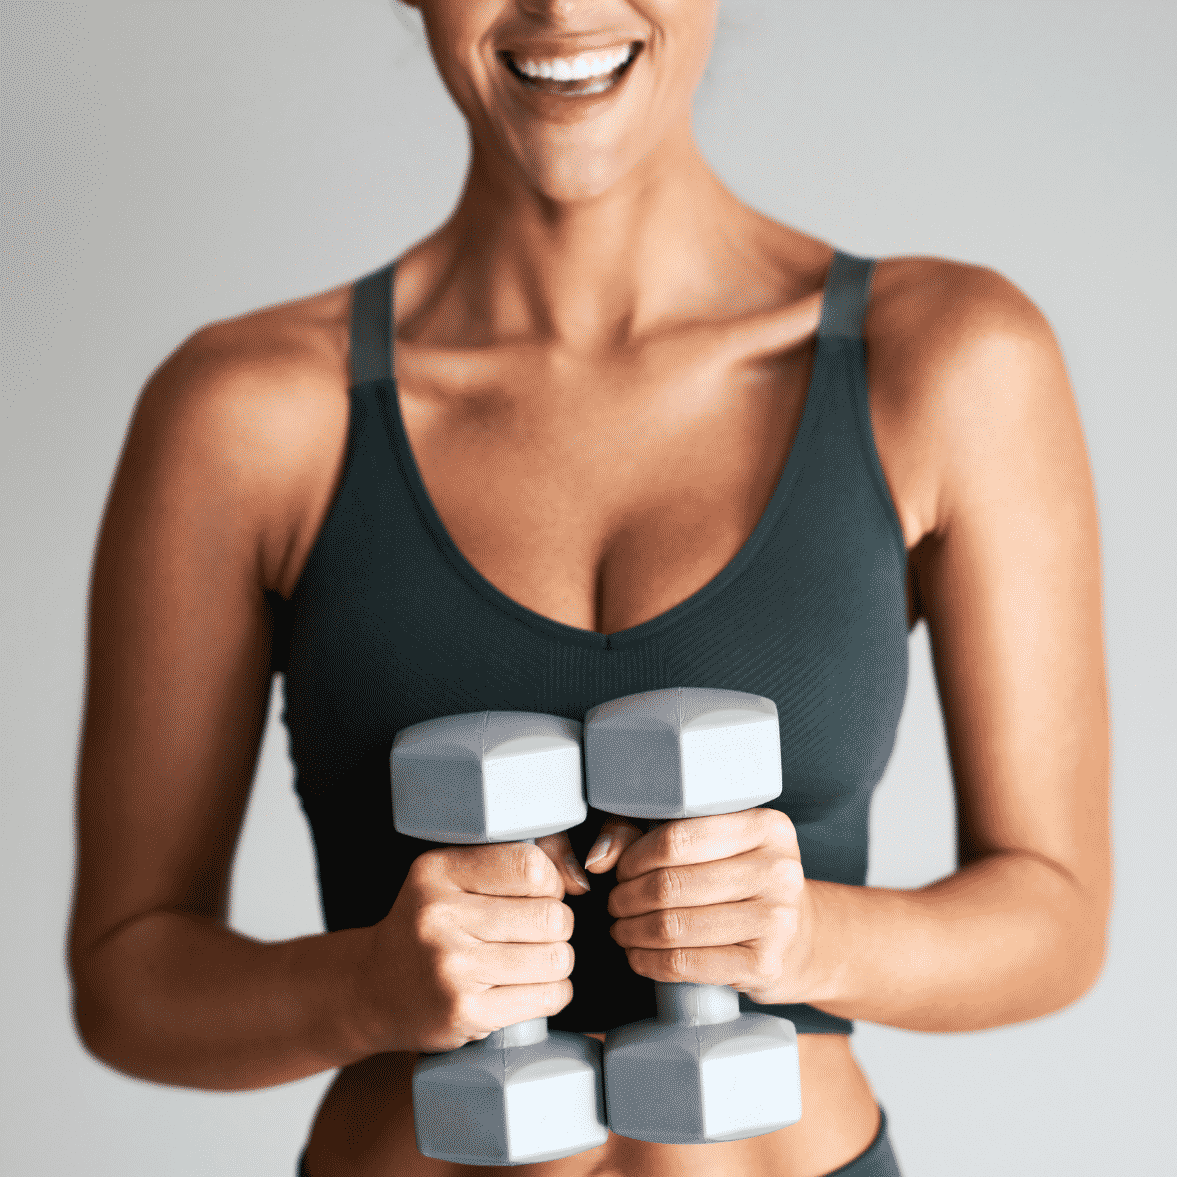 Unlock the secret to toned arms and bid farewell to flabby arms